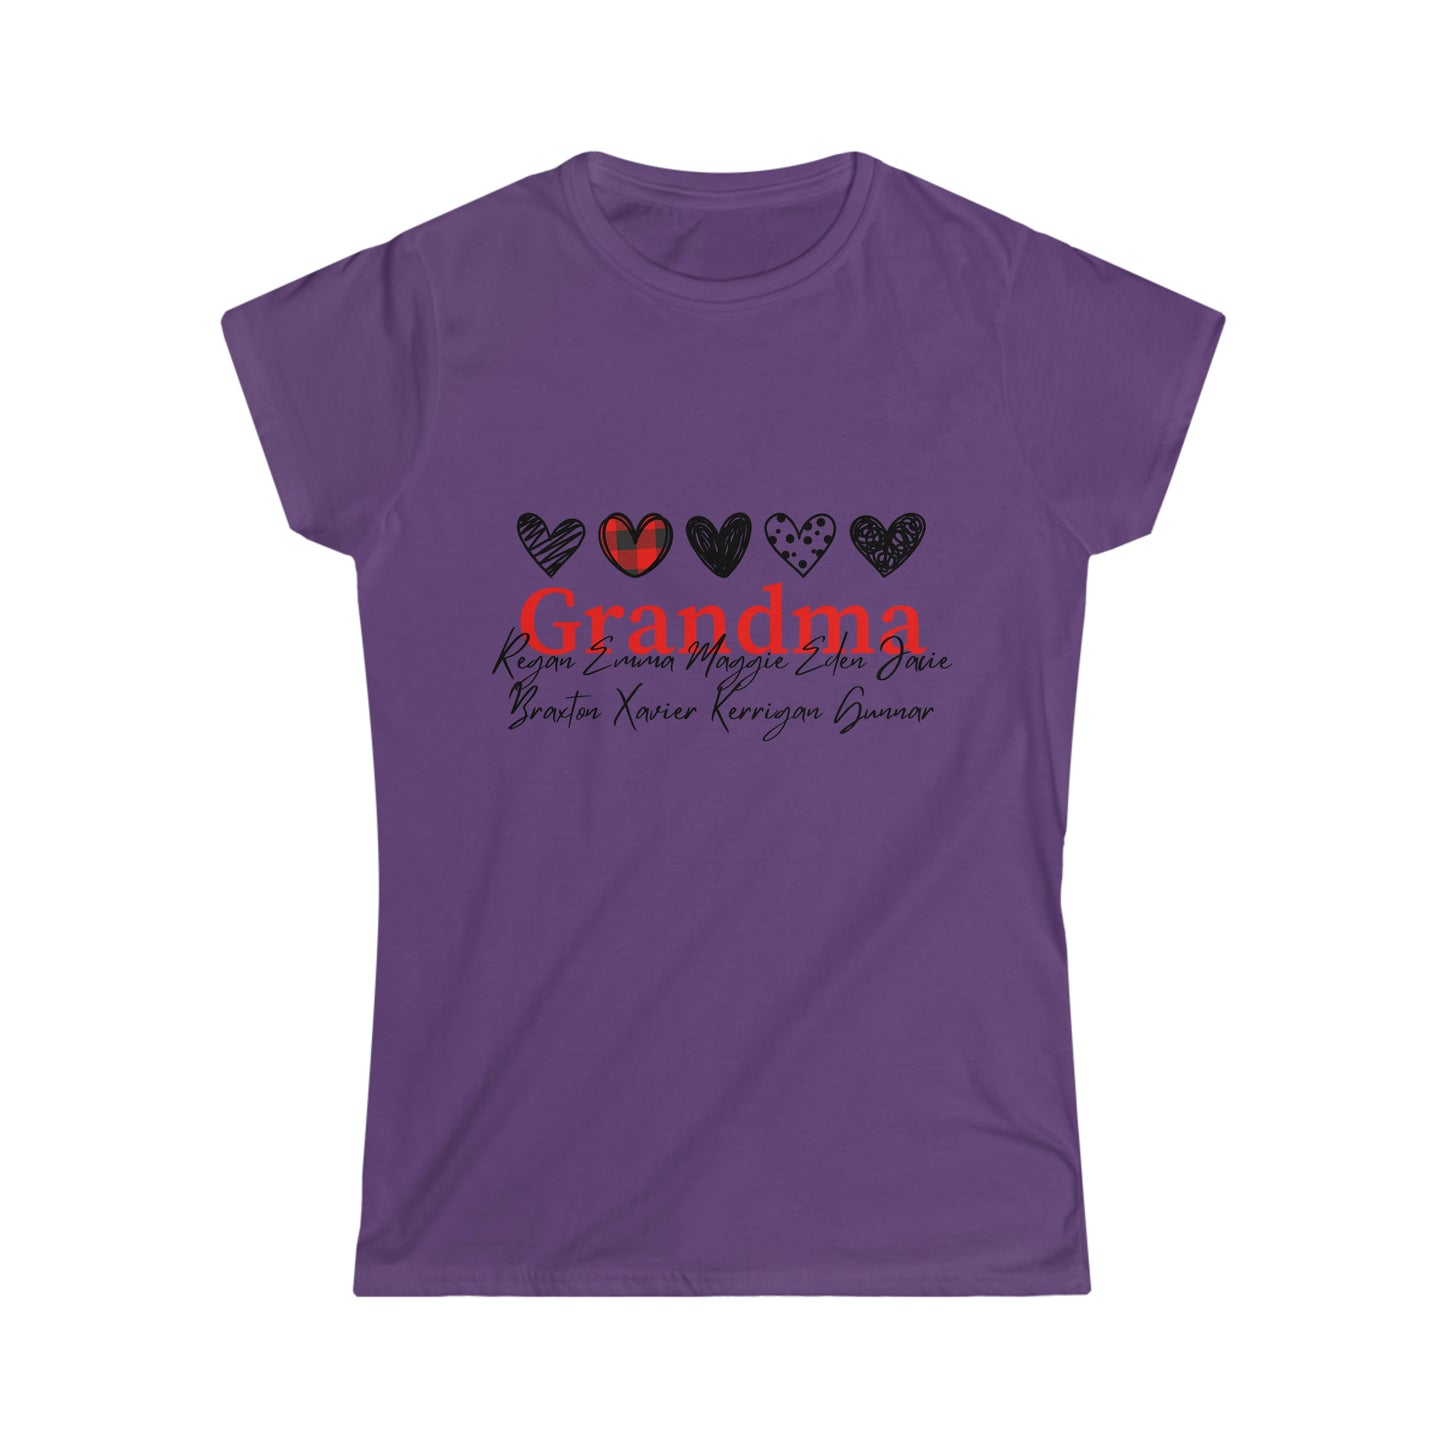 Women's Softstyle Tee, Grandma Shirt, Mom Shirt, Mother's Day Gift, Customizable Shirt, Personalize with Names